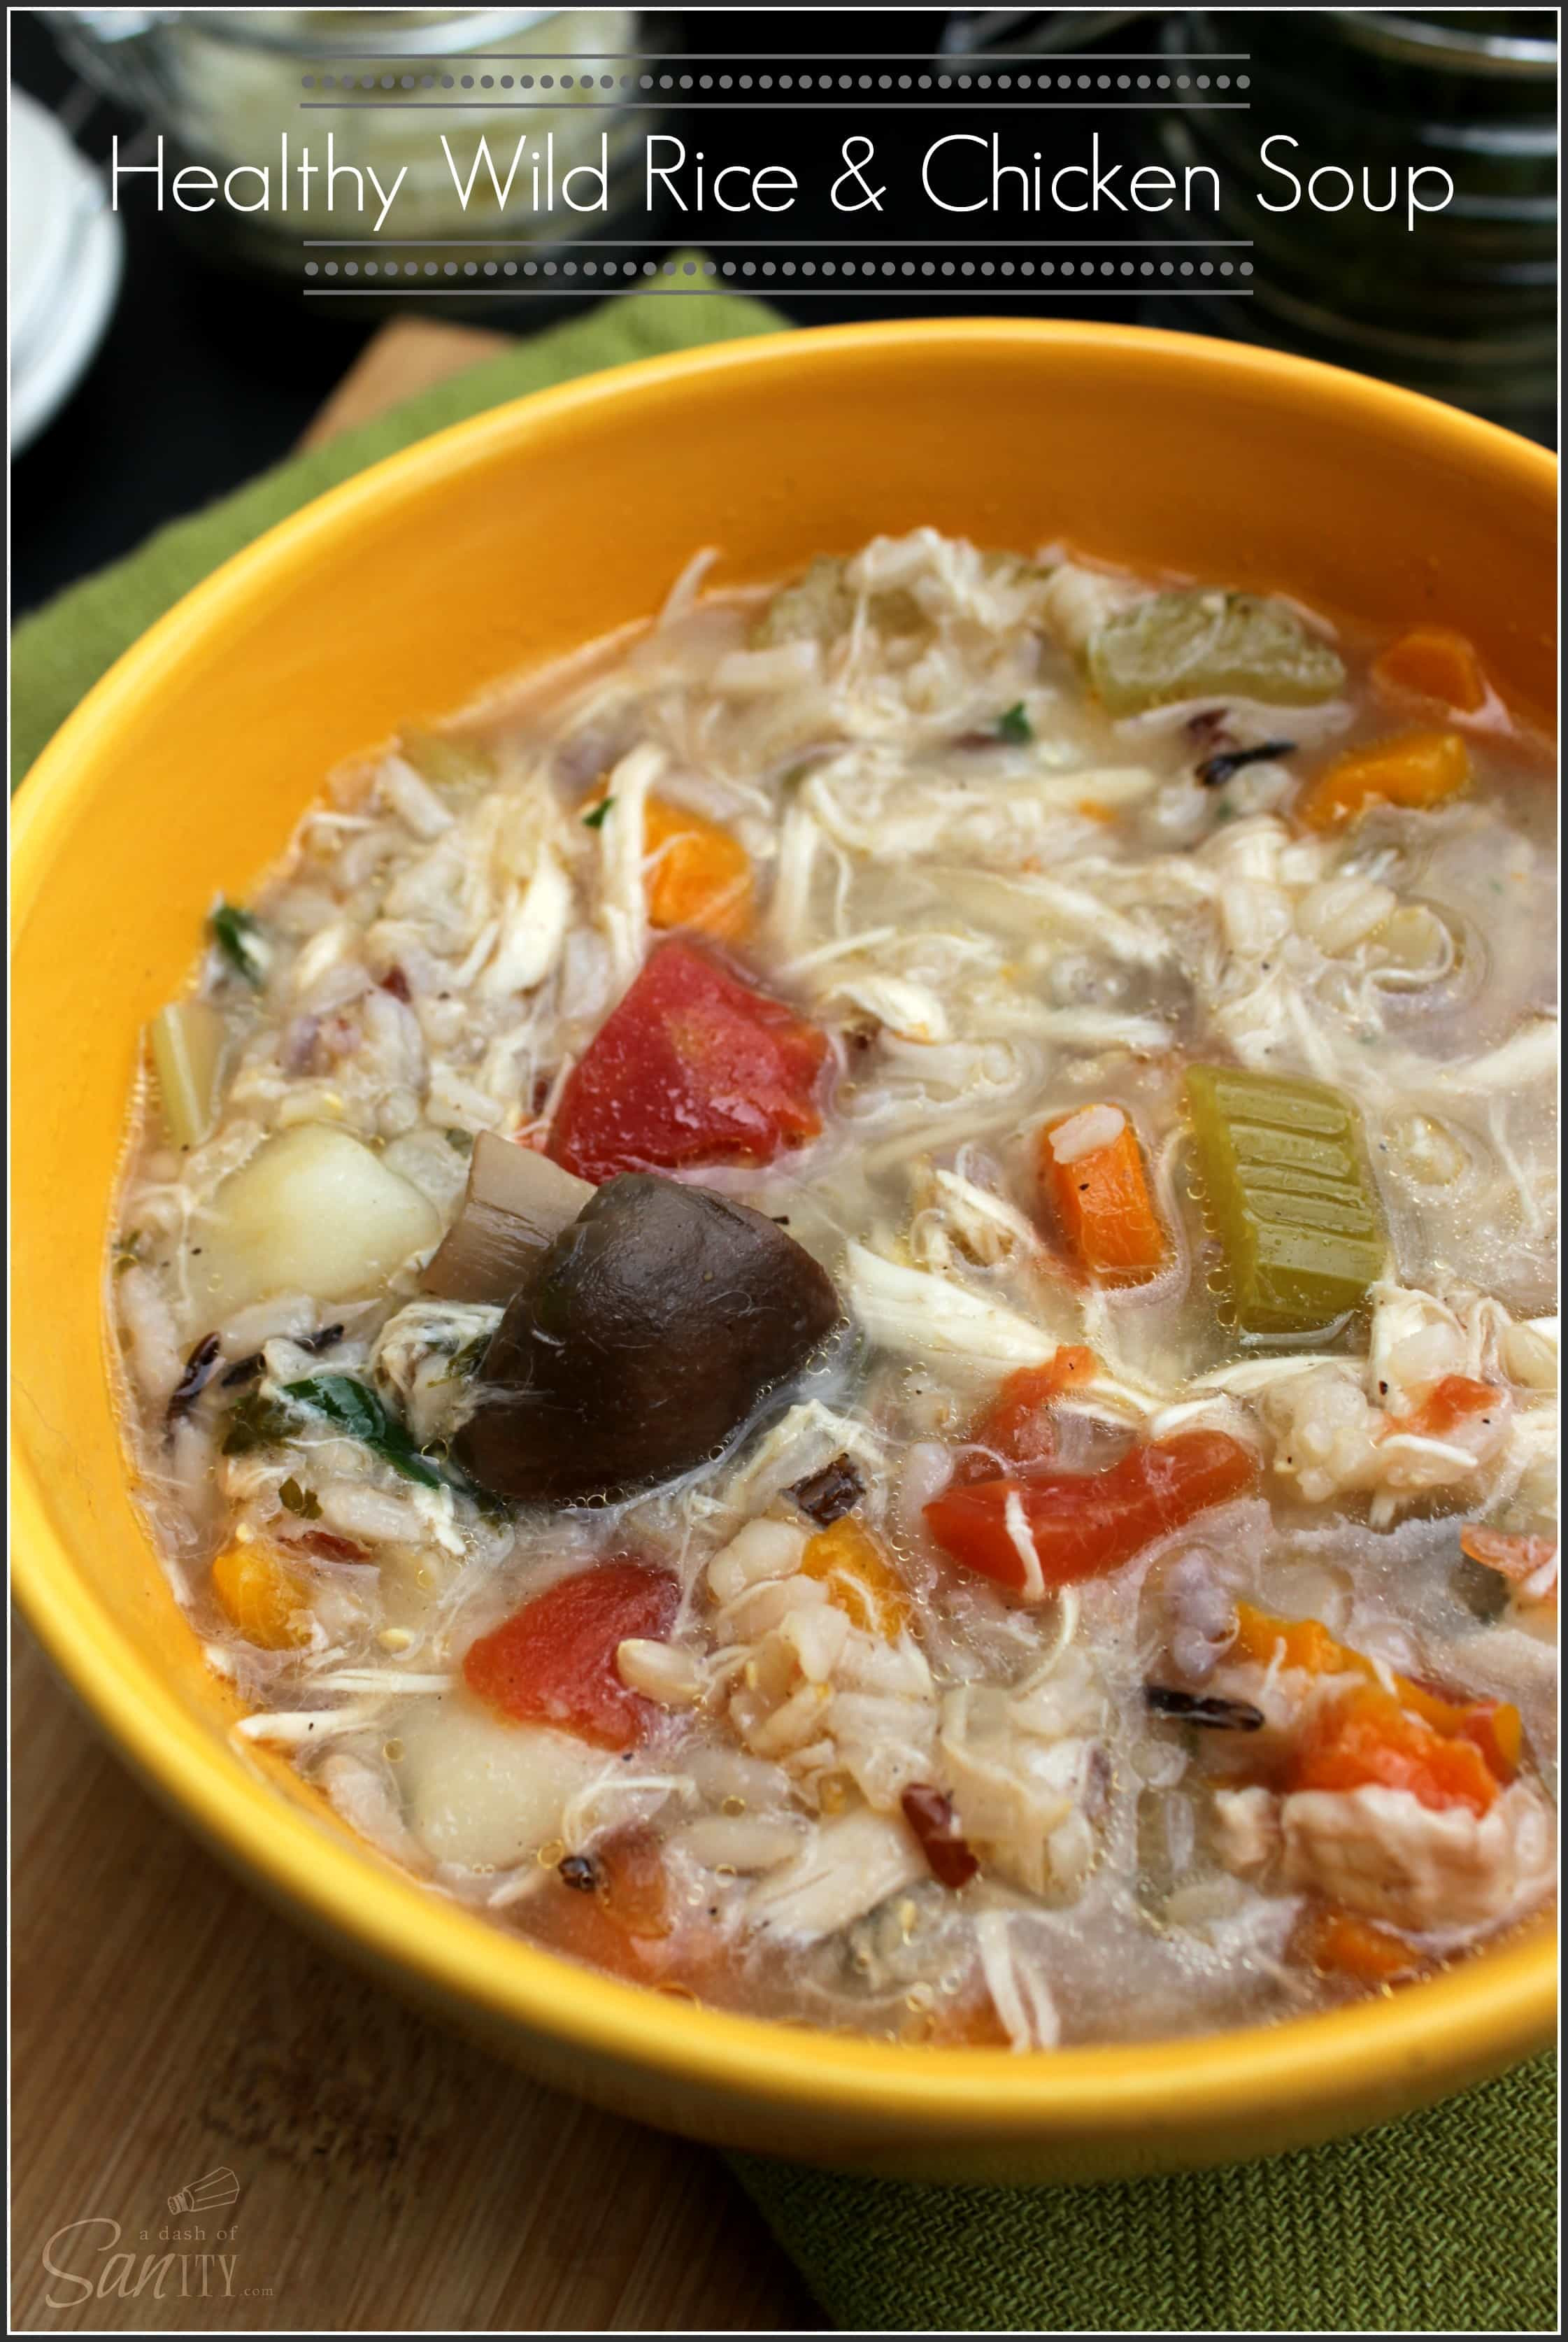 Healthy Chicken And Rice Soup
 Healthy Wild Rice & Chicken Soup A Dash of Sanity